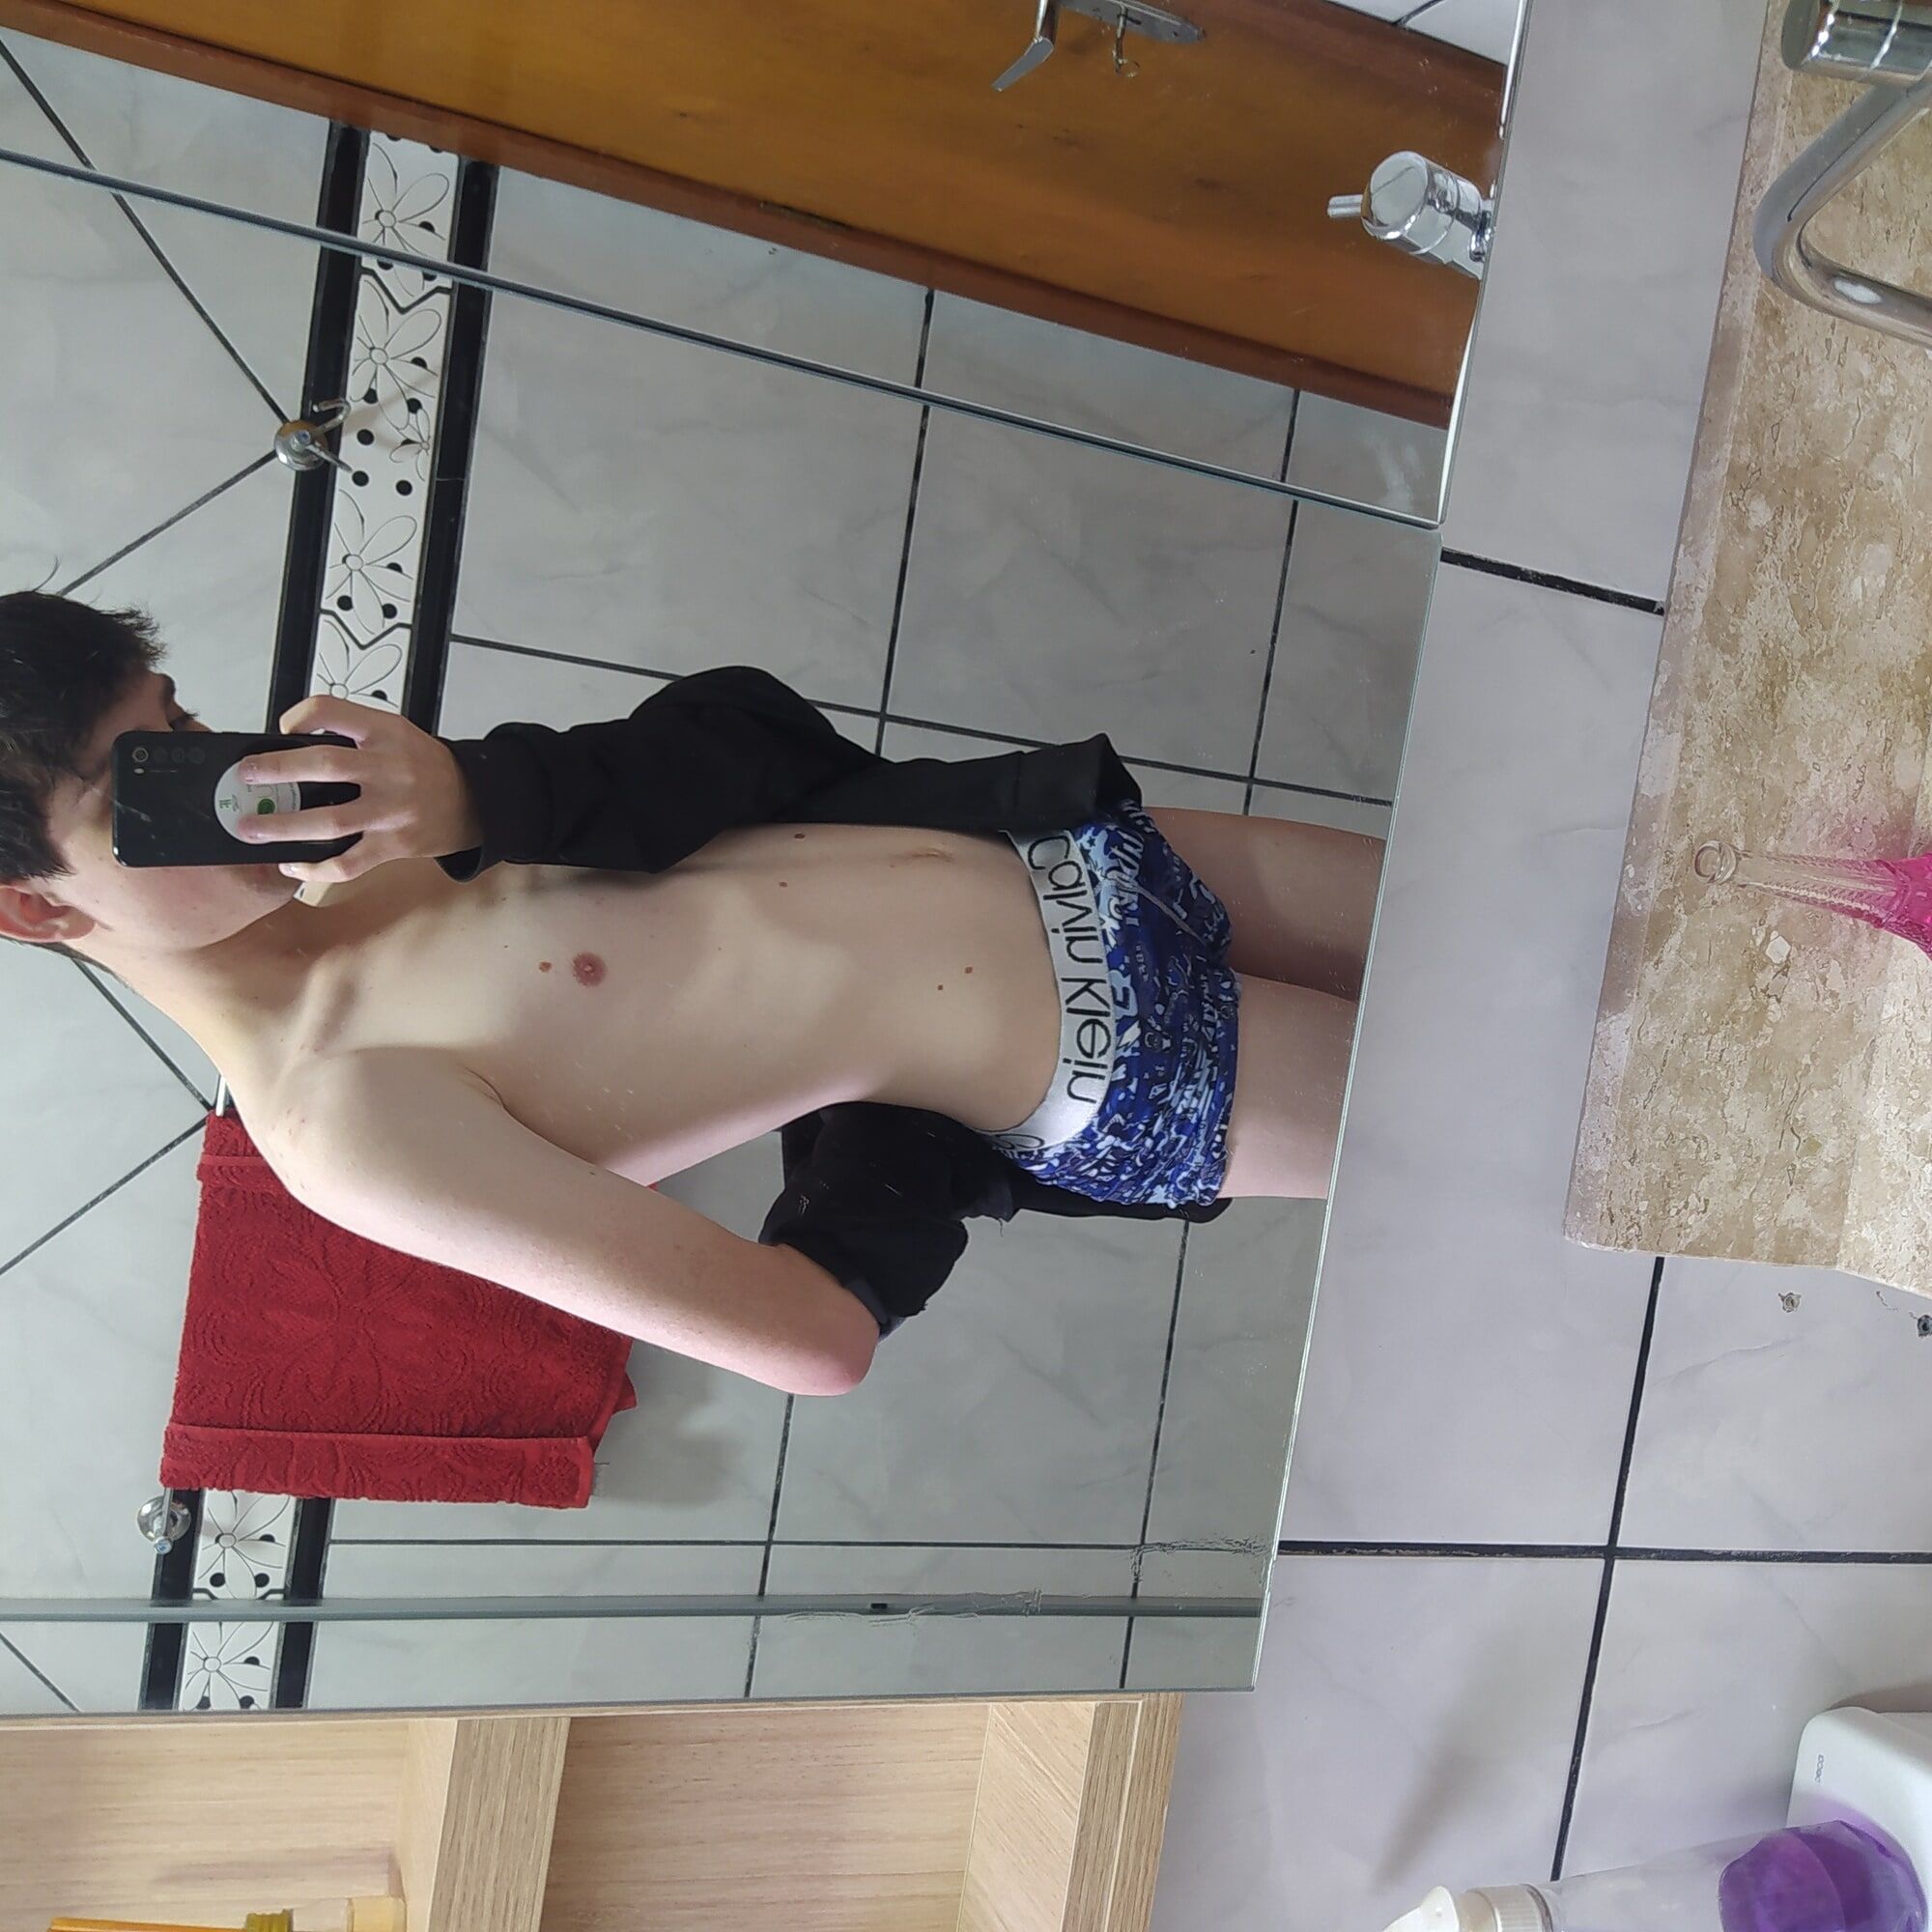 Boy showing off in the mirror #8